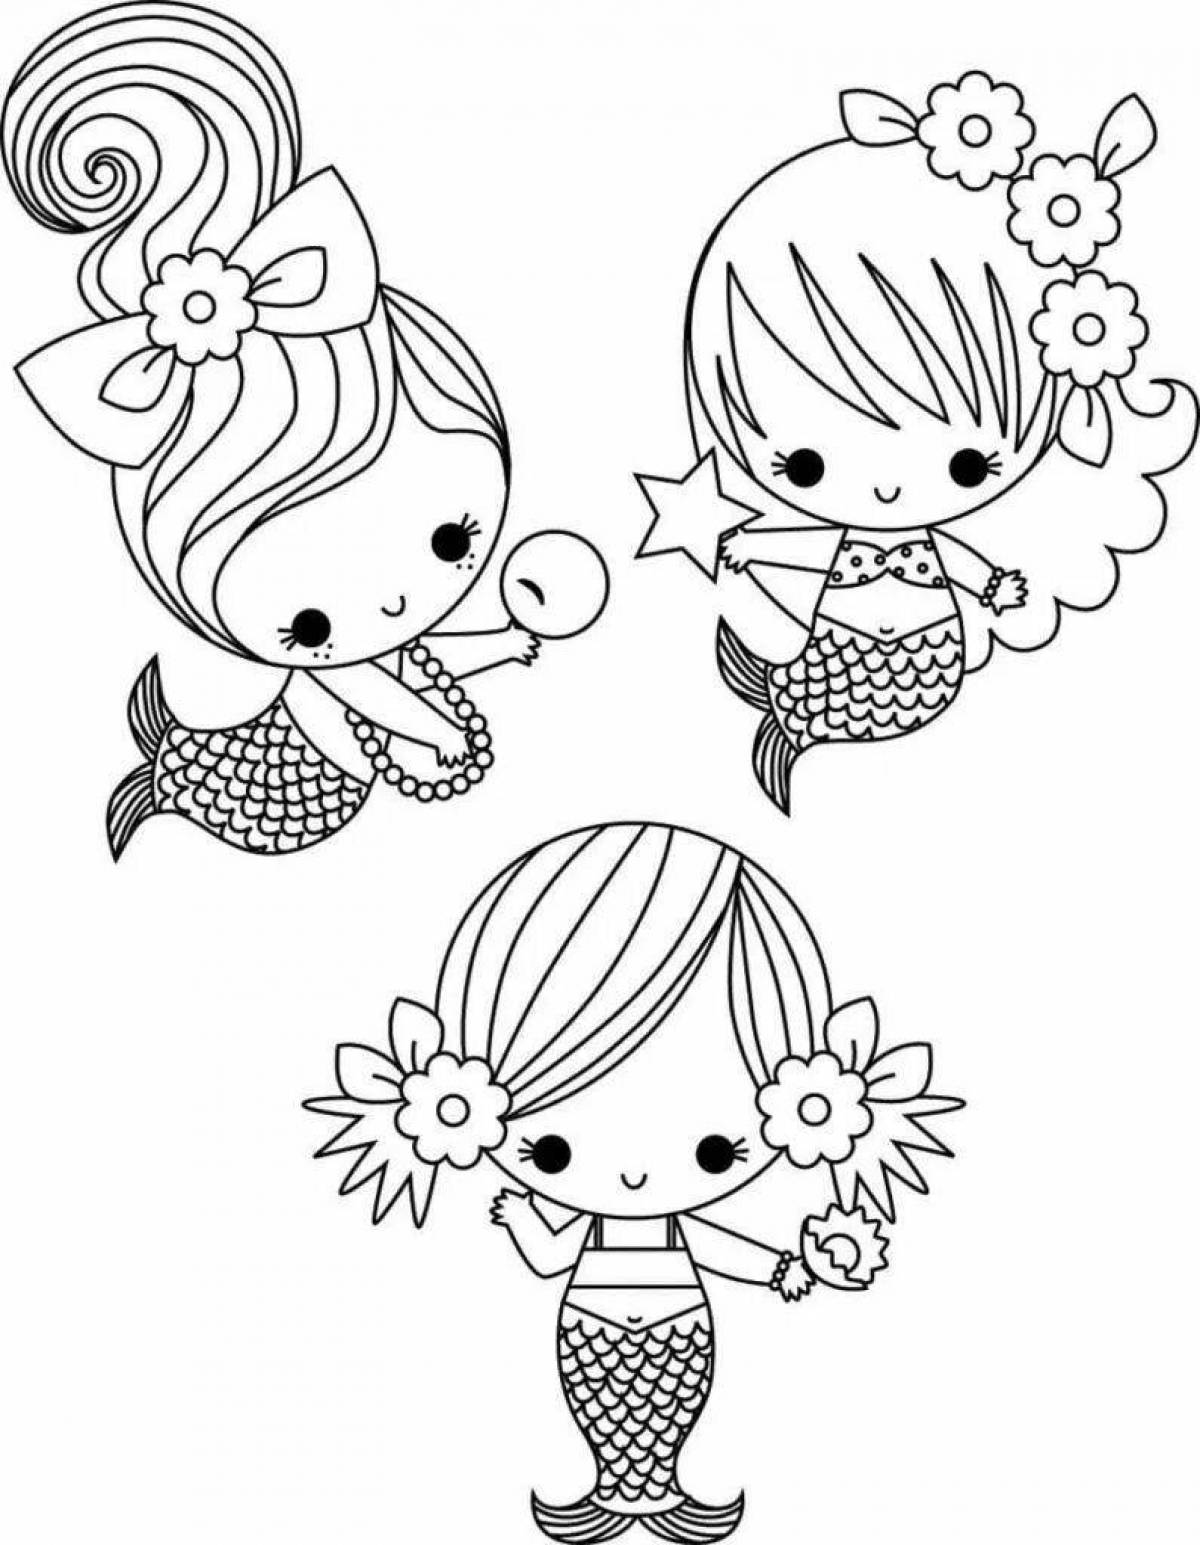 Live coloring for girls cute little